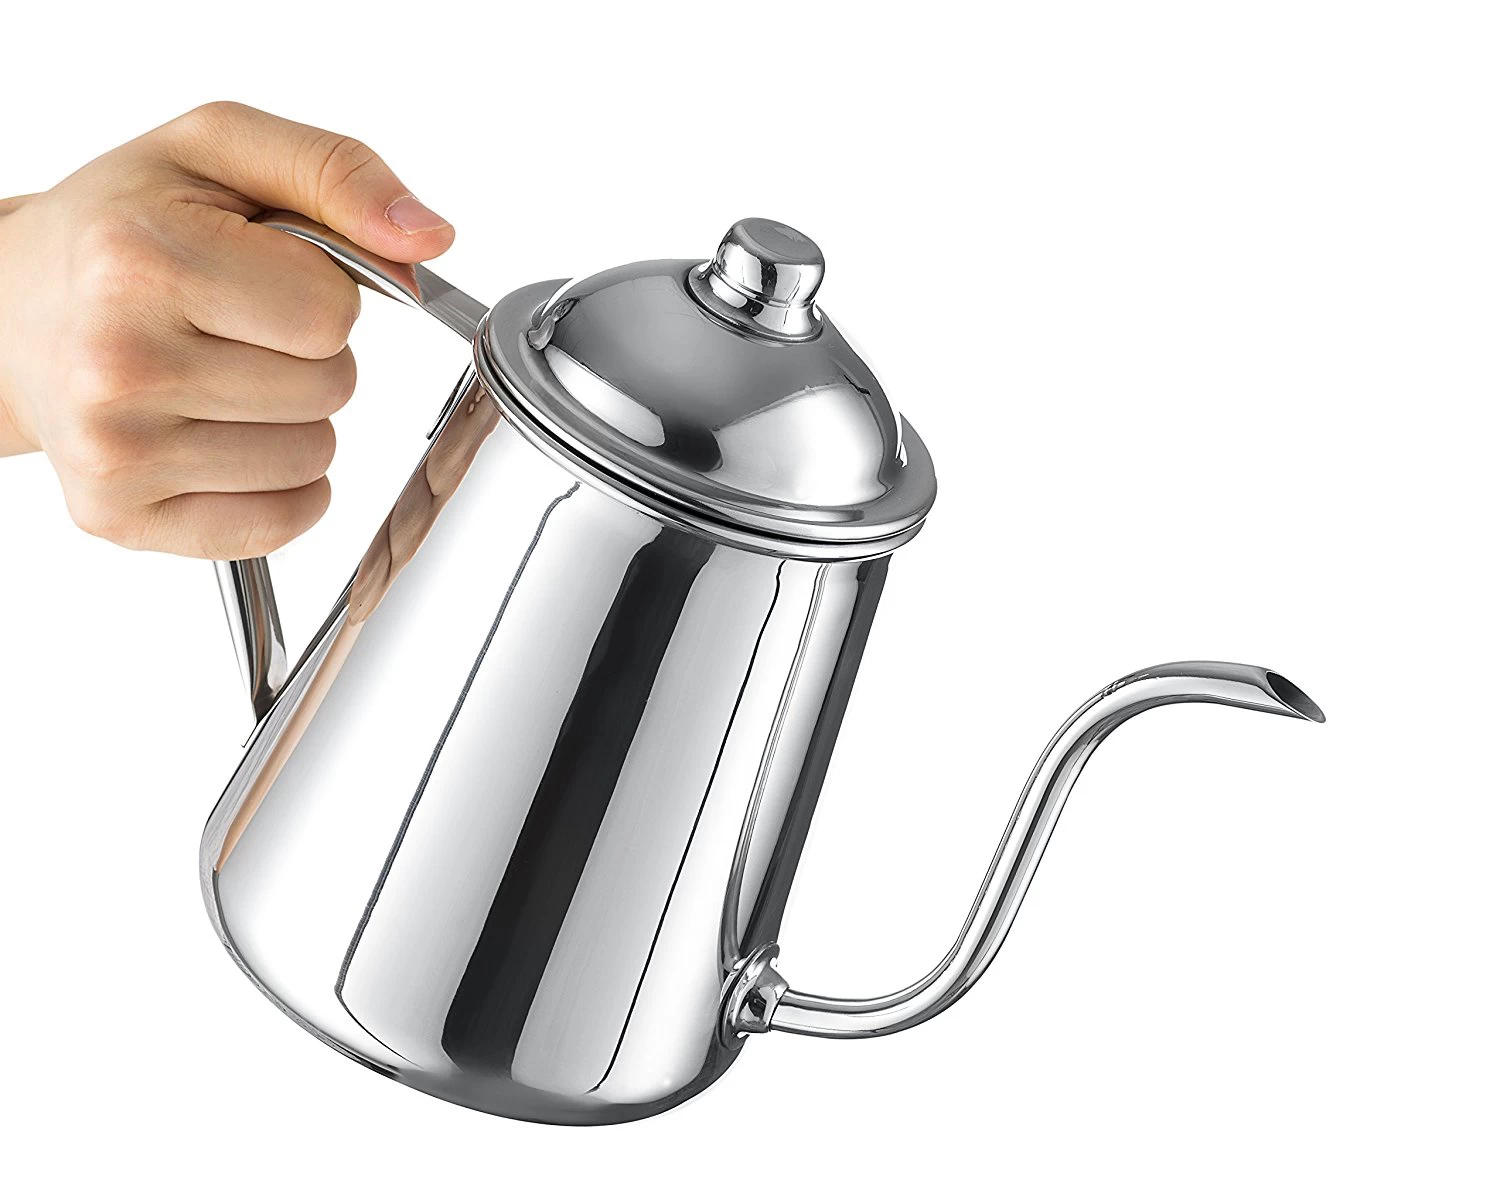 Stainless Steel  Coffee pot wholesales, China Coffee pot company, rainbow coffee pot manufacturer china